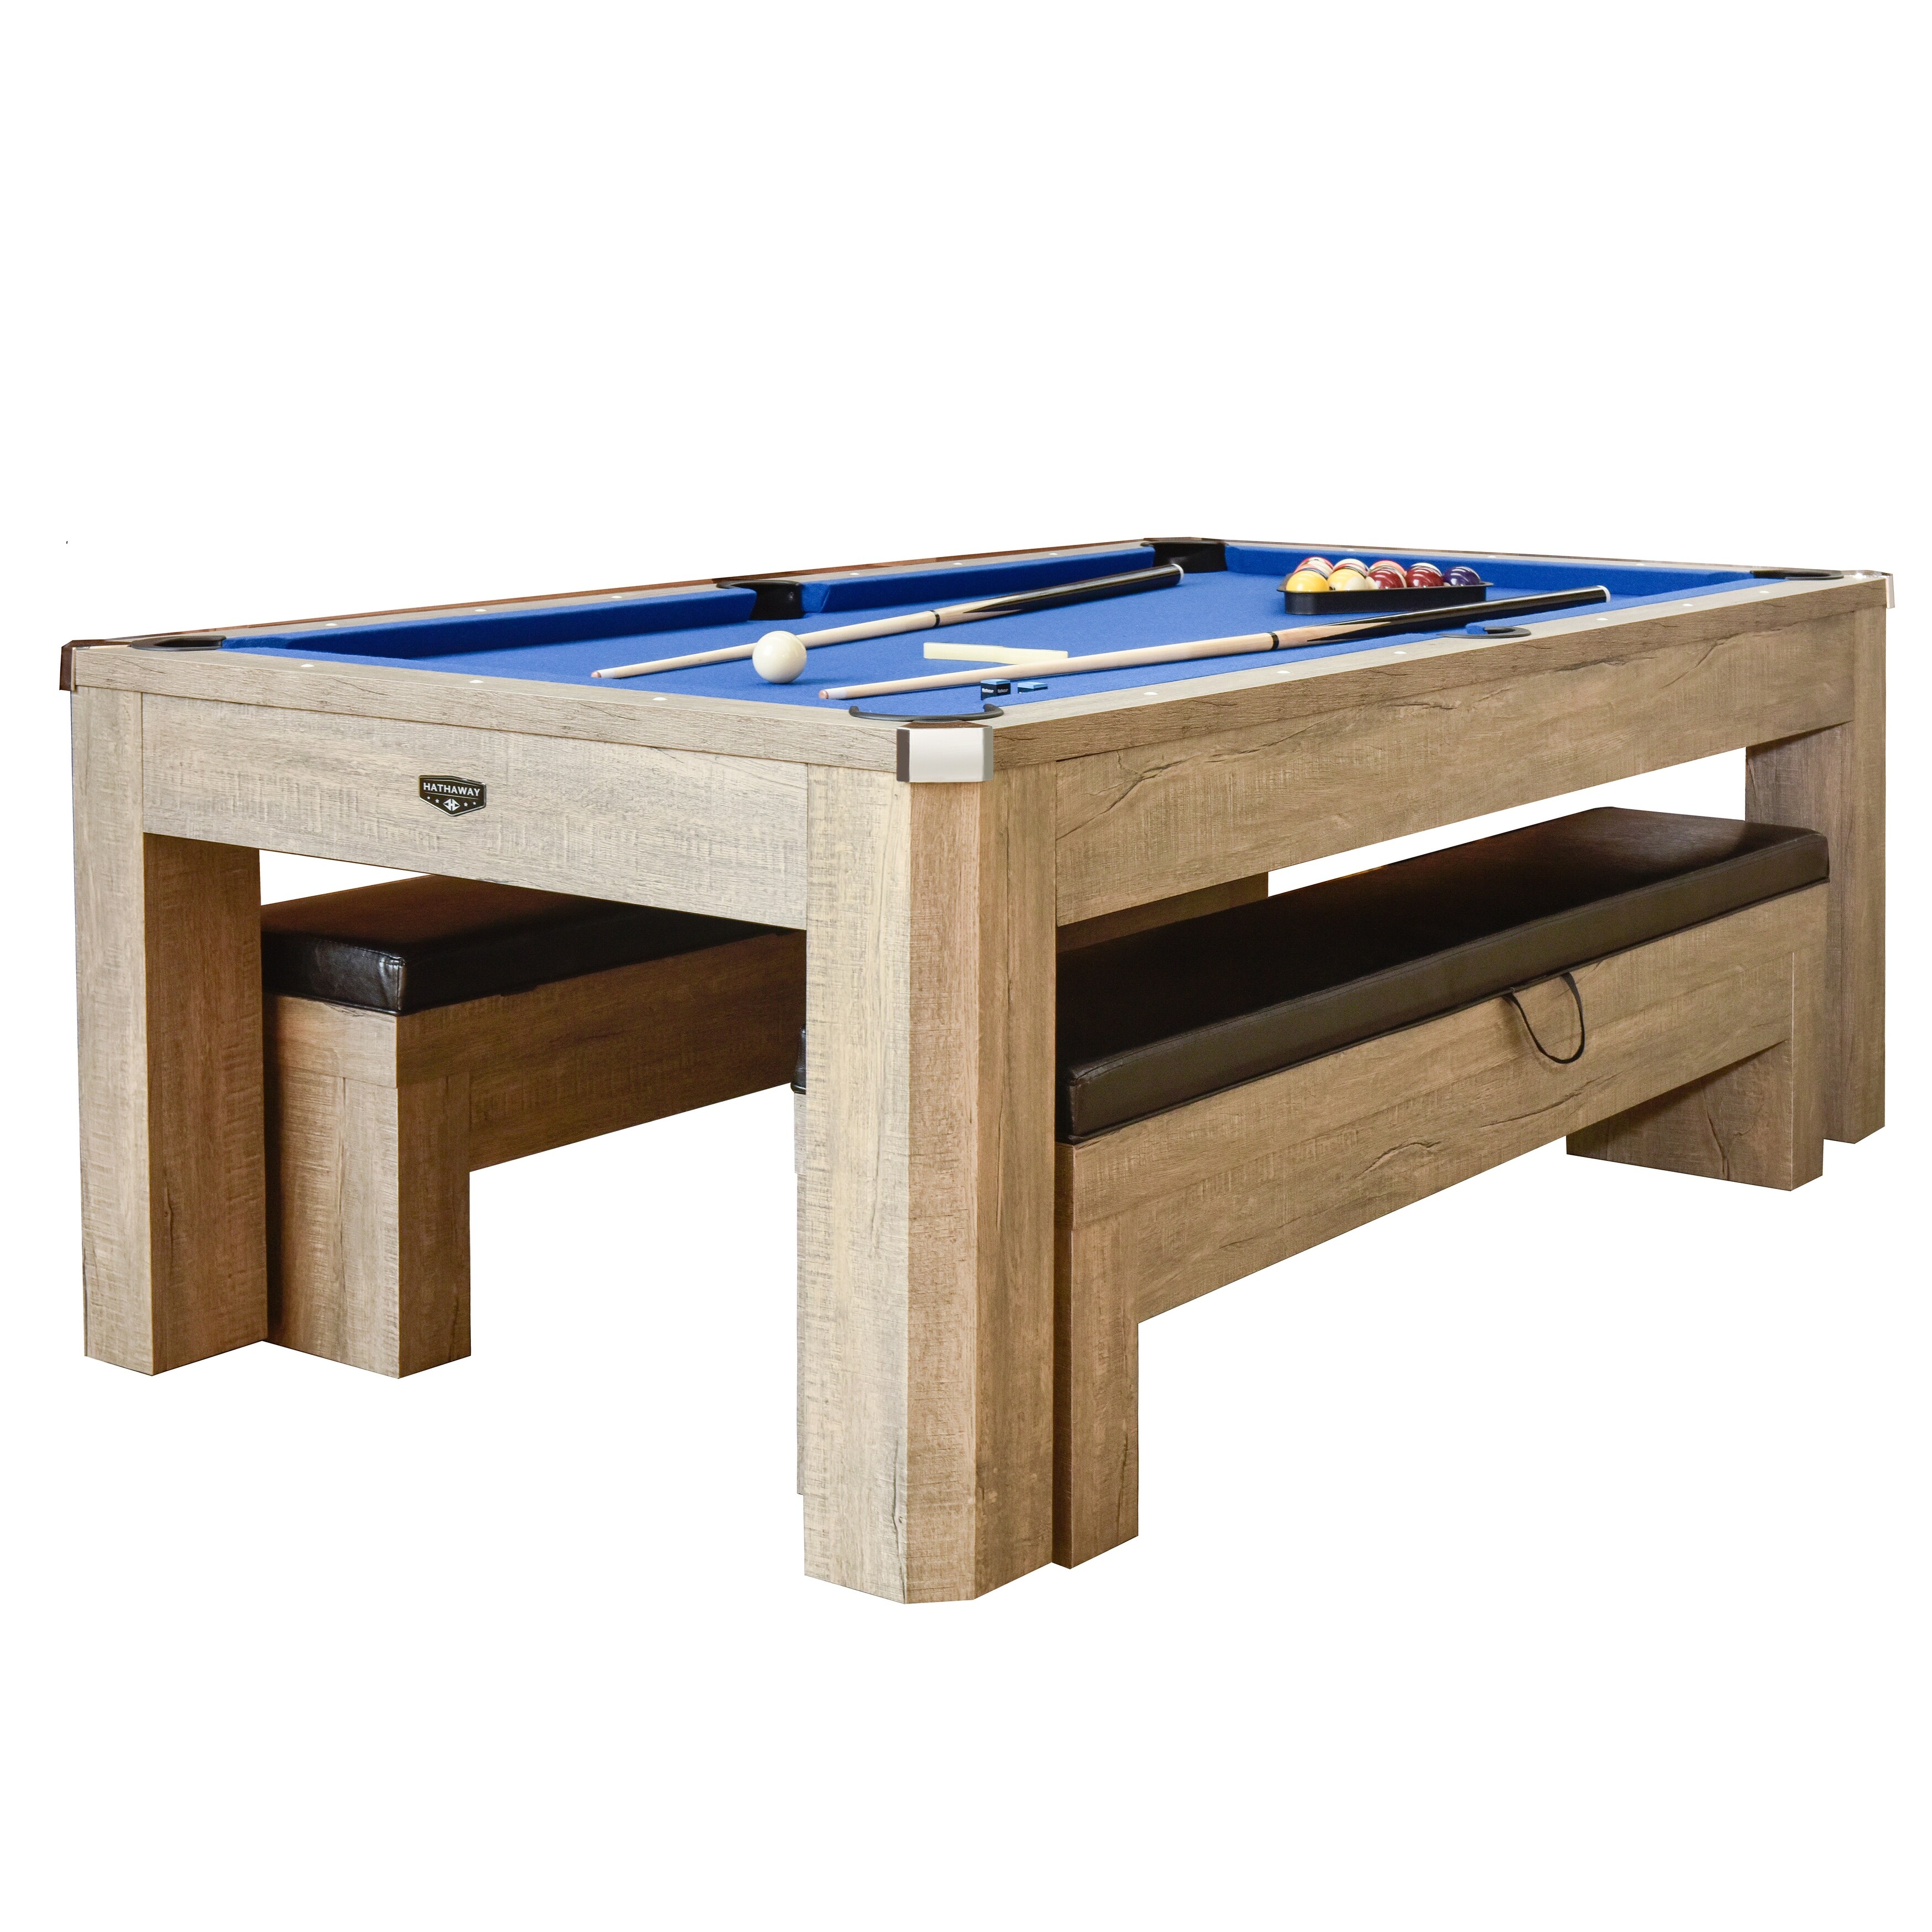 7FT 3 in 1 Classic Sport Game Multi Functional Table - China Pool Table and  Billiard Table price